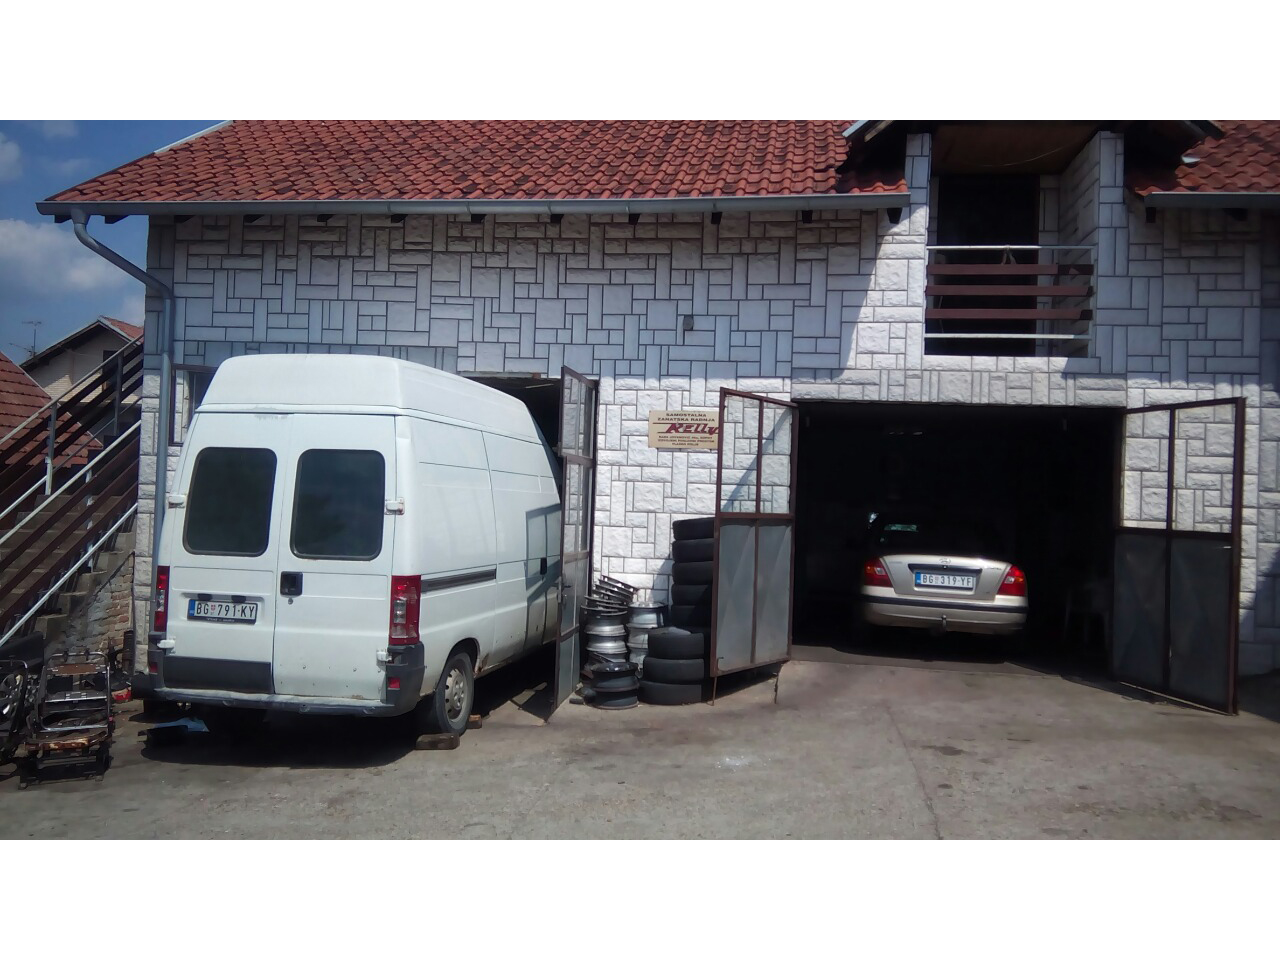 CAR PARTS HYUNDAI AND DAEWOO AND CAR SERVICE RELLY Replacement parts Belgrade - Photo 2